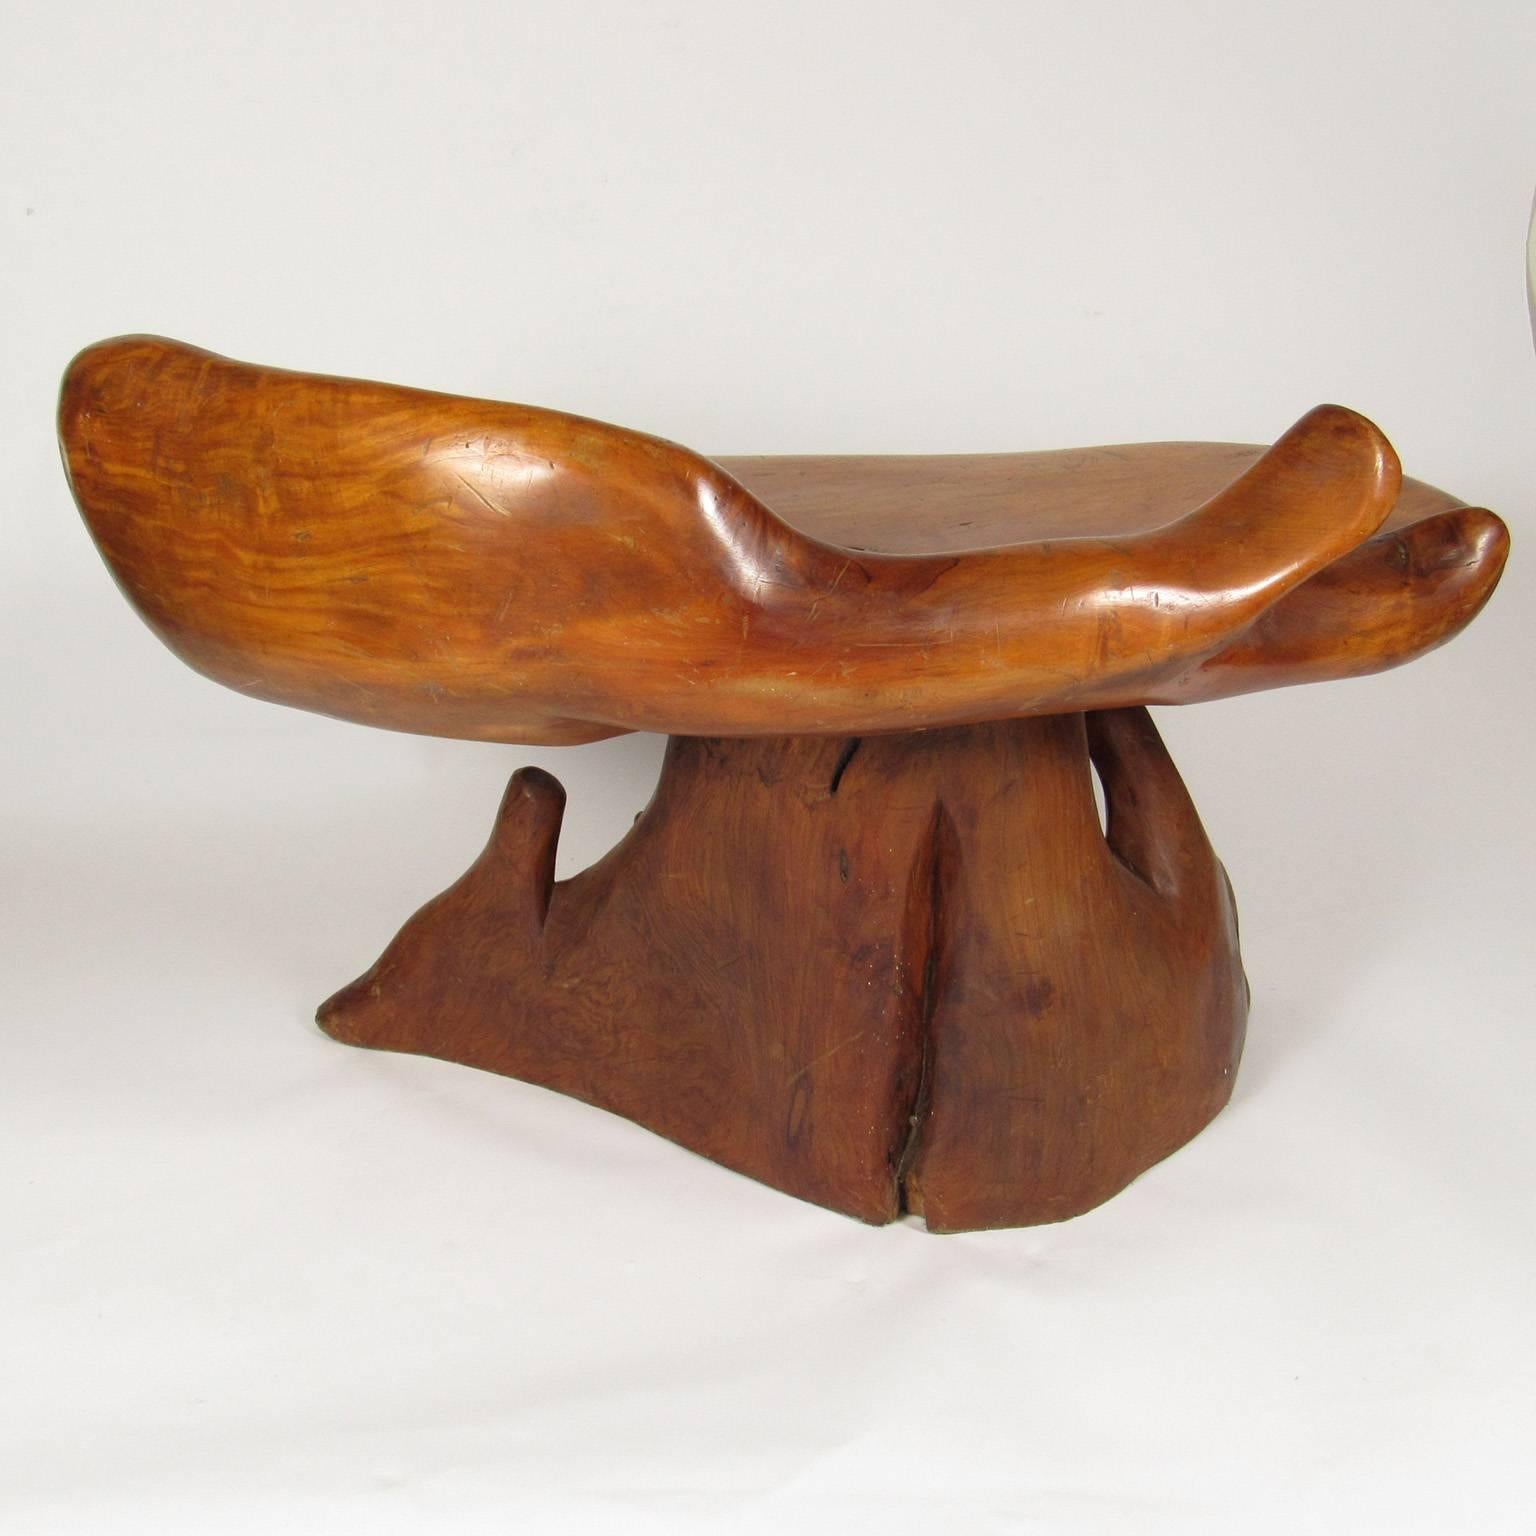 Mid-20th century organic rootwood pedestal bench
Dimensions: 19 x 30 1/2 x 17 inches, seat height: 14 1/2 inches.